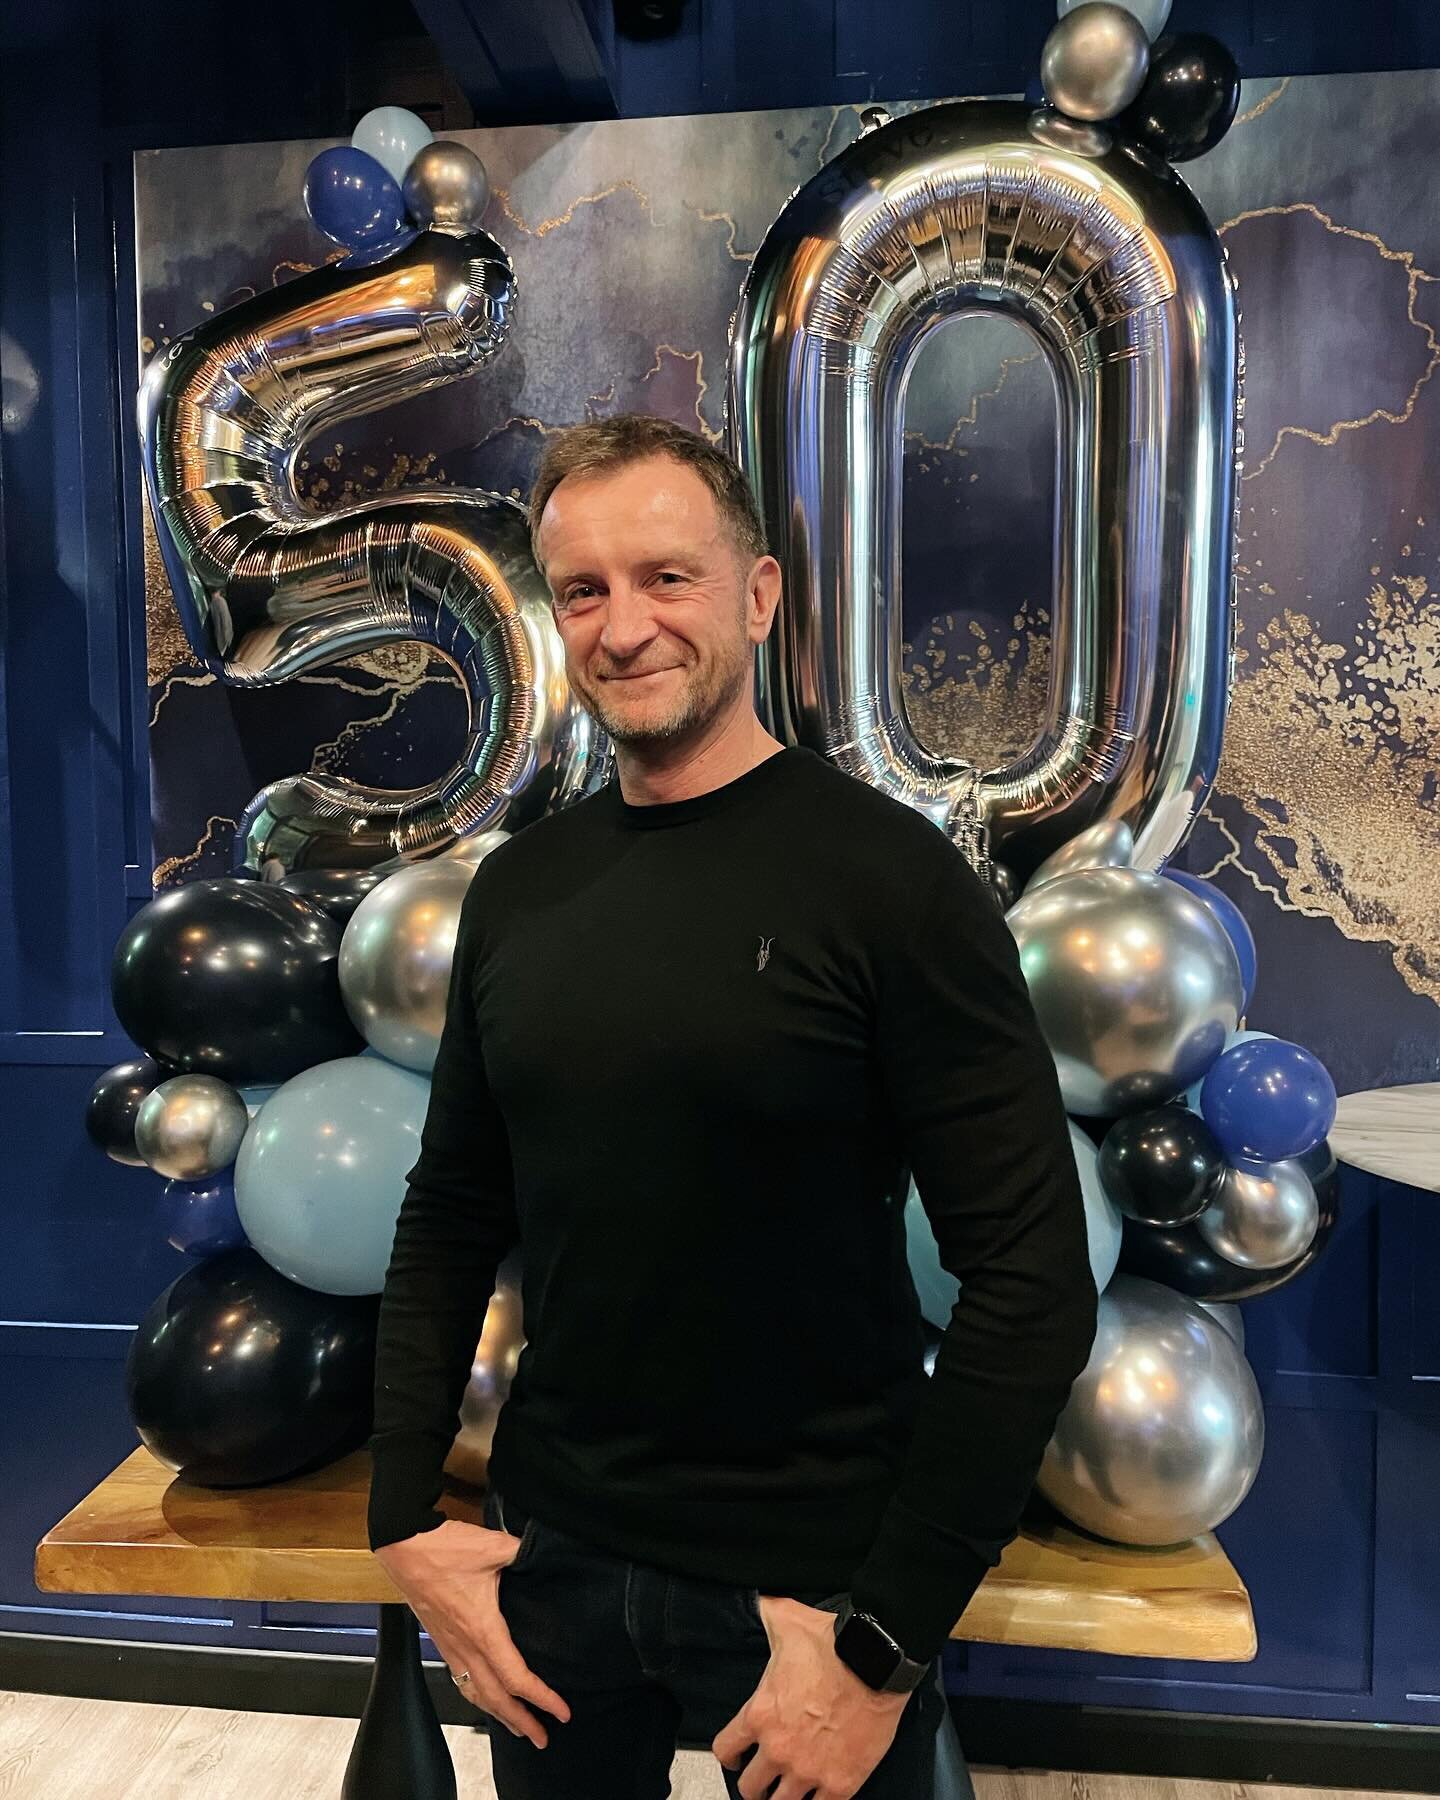 Happy 50th Birthday to our founder Steve Green!
Have an awesome day from all the Quagga family 🎂🎉. #birthday #celebration #50 #justanumber #lifebeginsat50